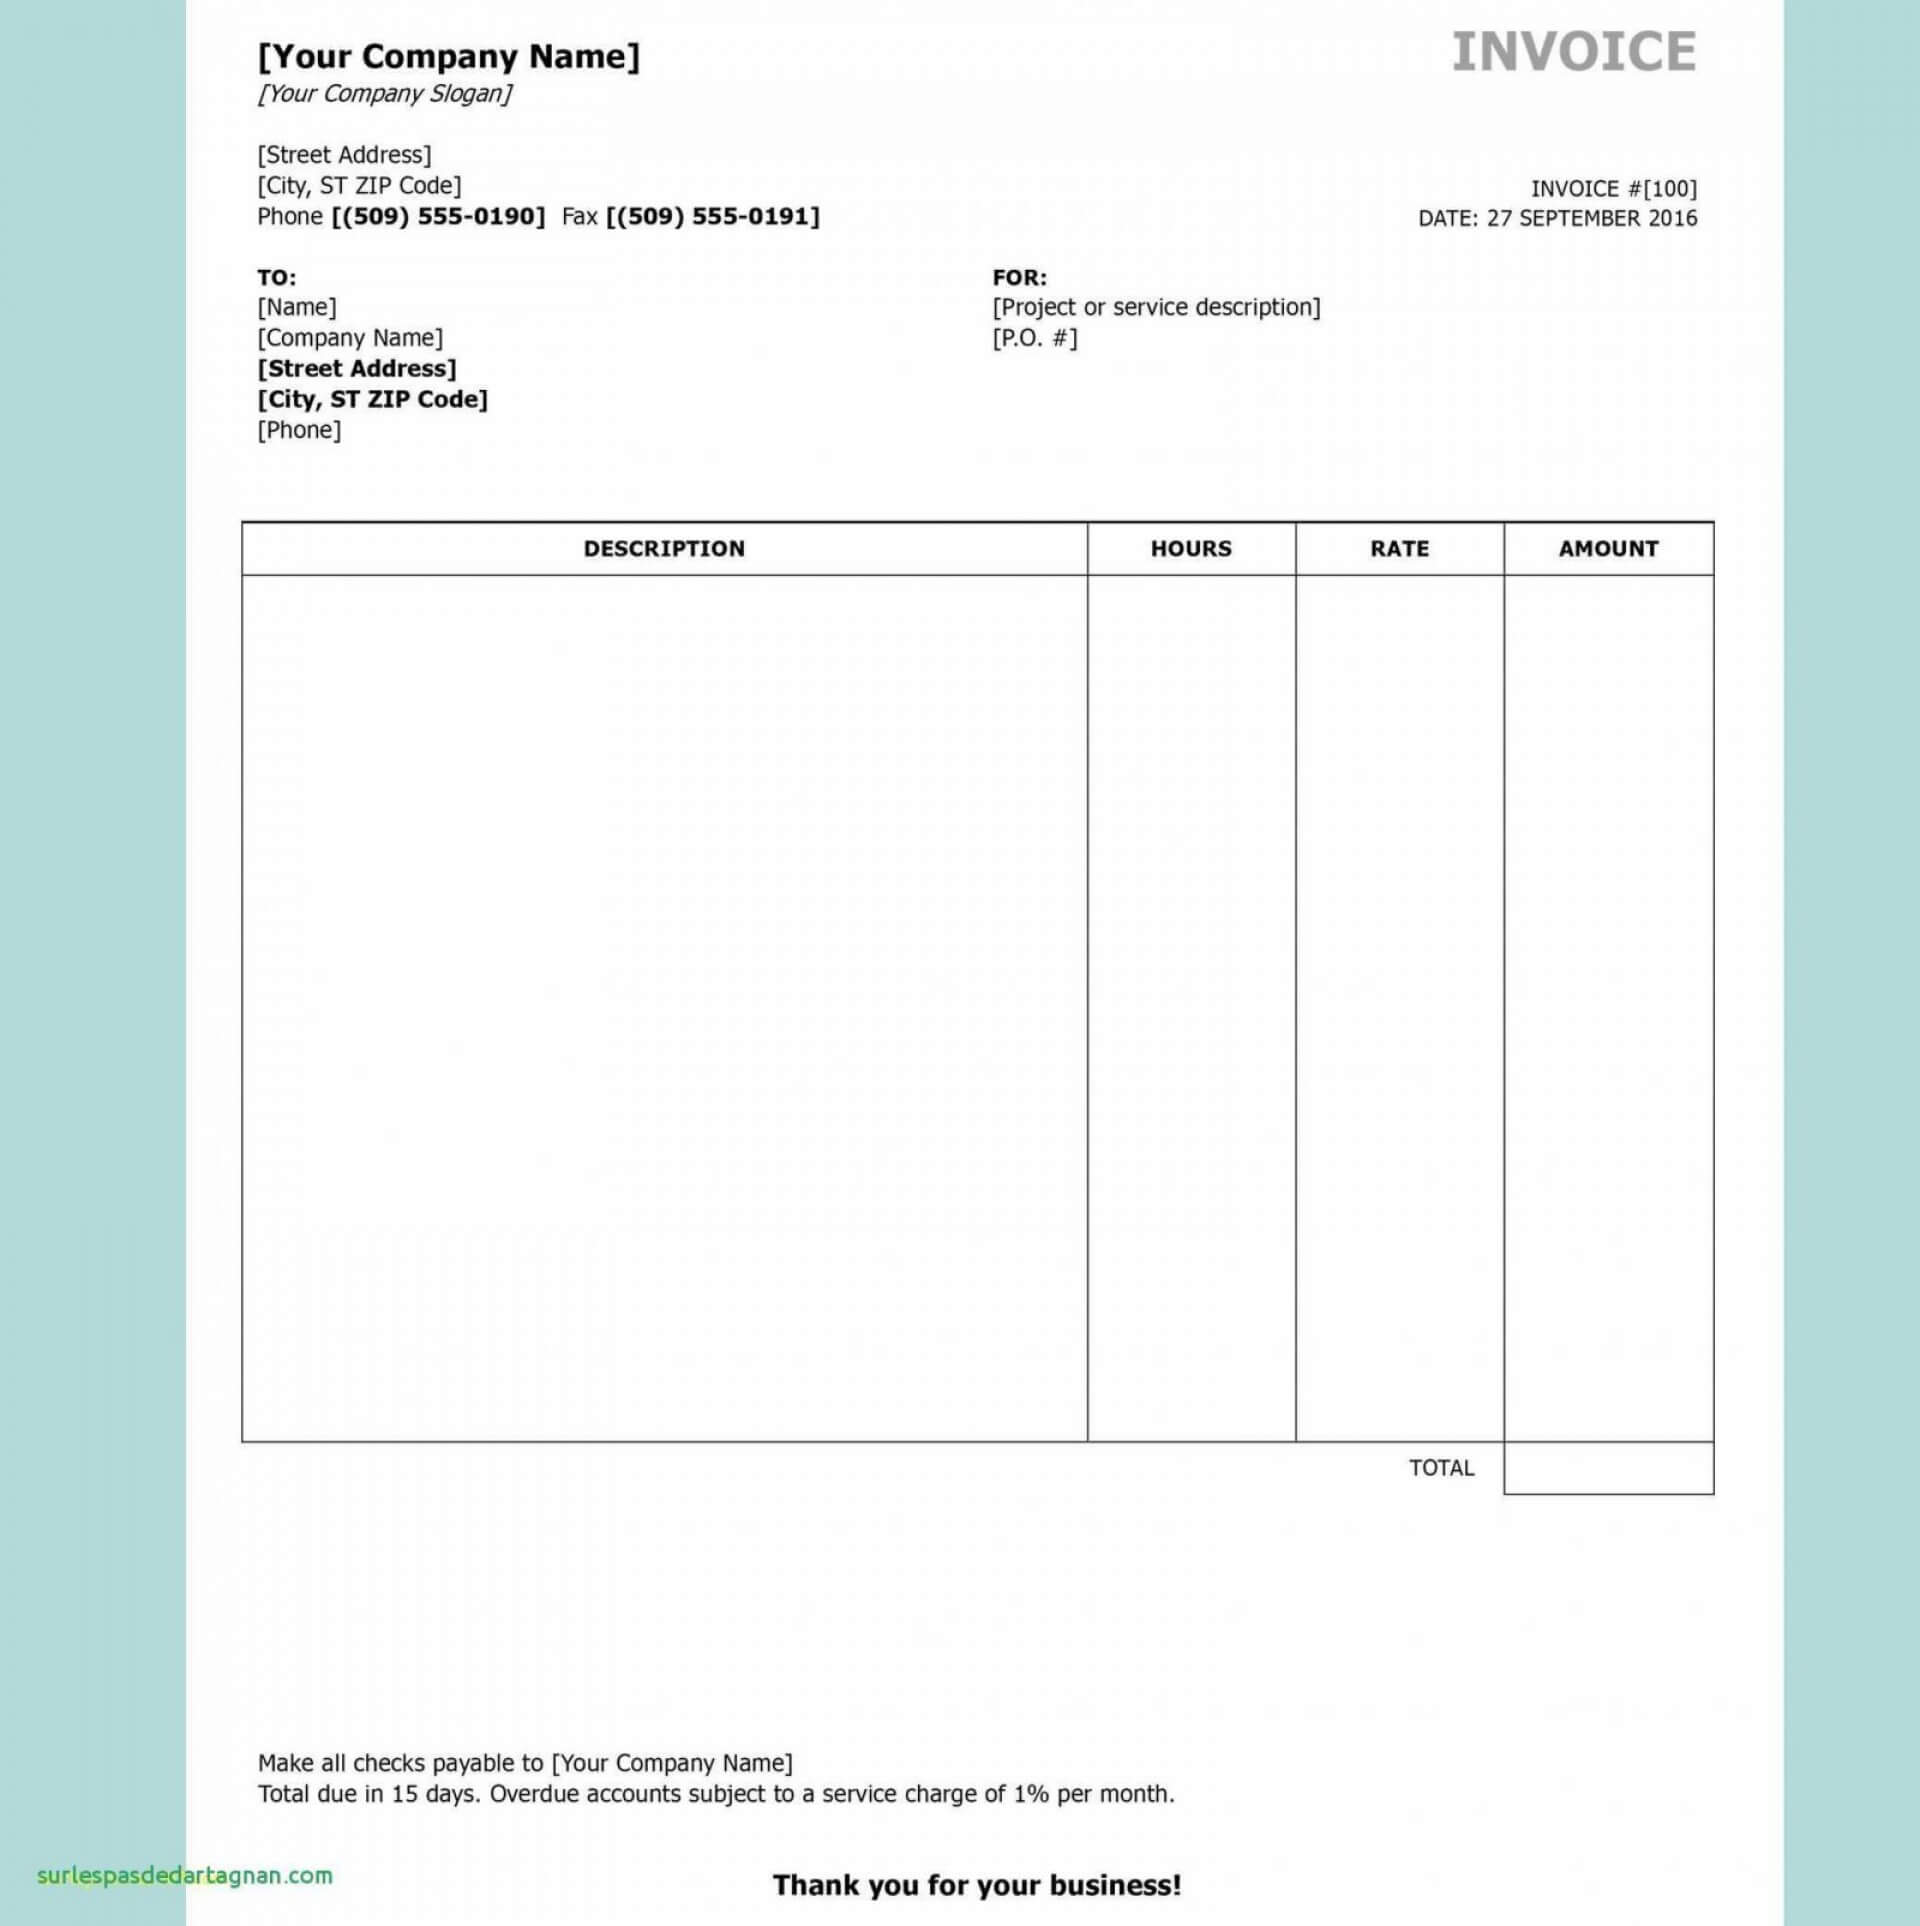 002-simple-proforma-invoice-template-word-magnificent-ideas-for-free